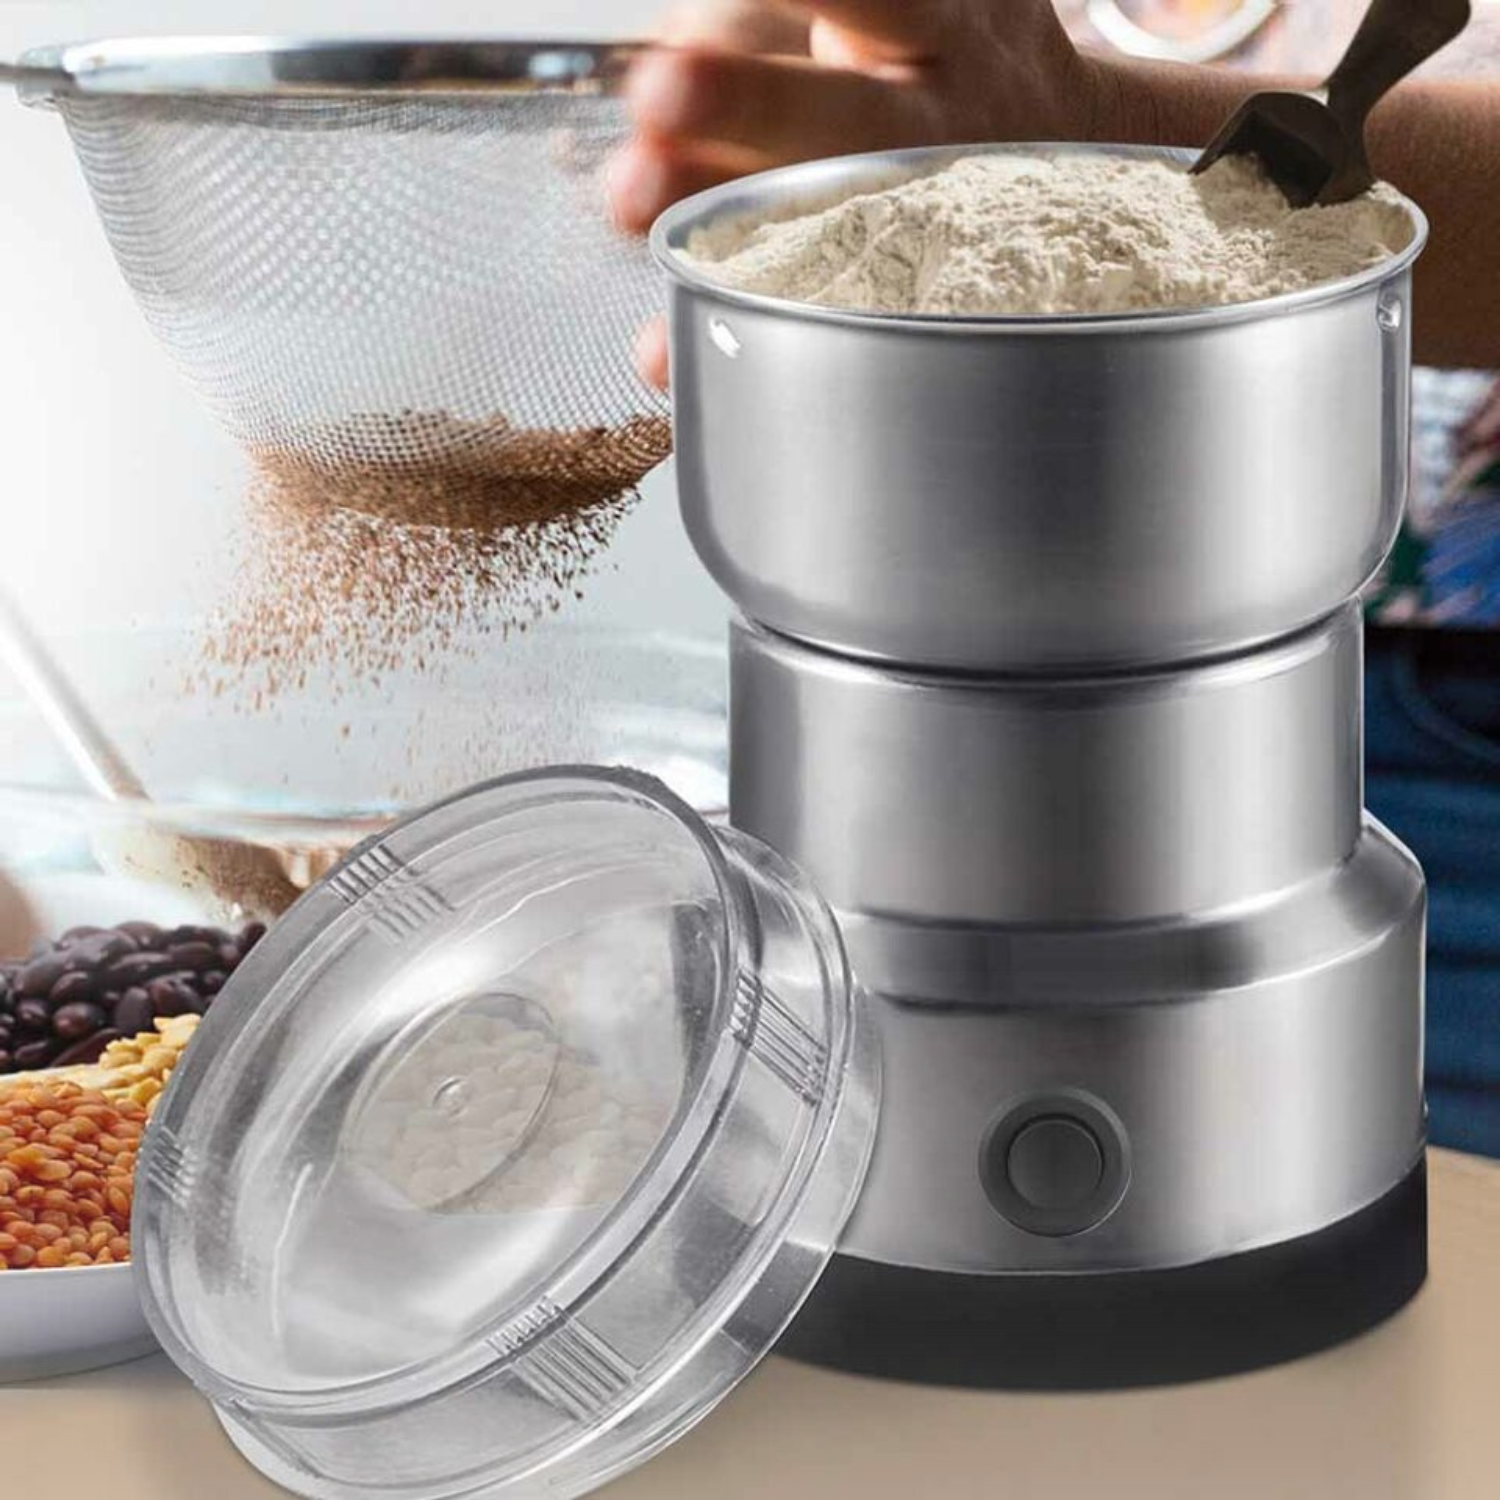 The All-in-One Smash Machine: Multifunction Grinder, Grain Grinder, Coffee Bean Powder Machine for Home and Office